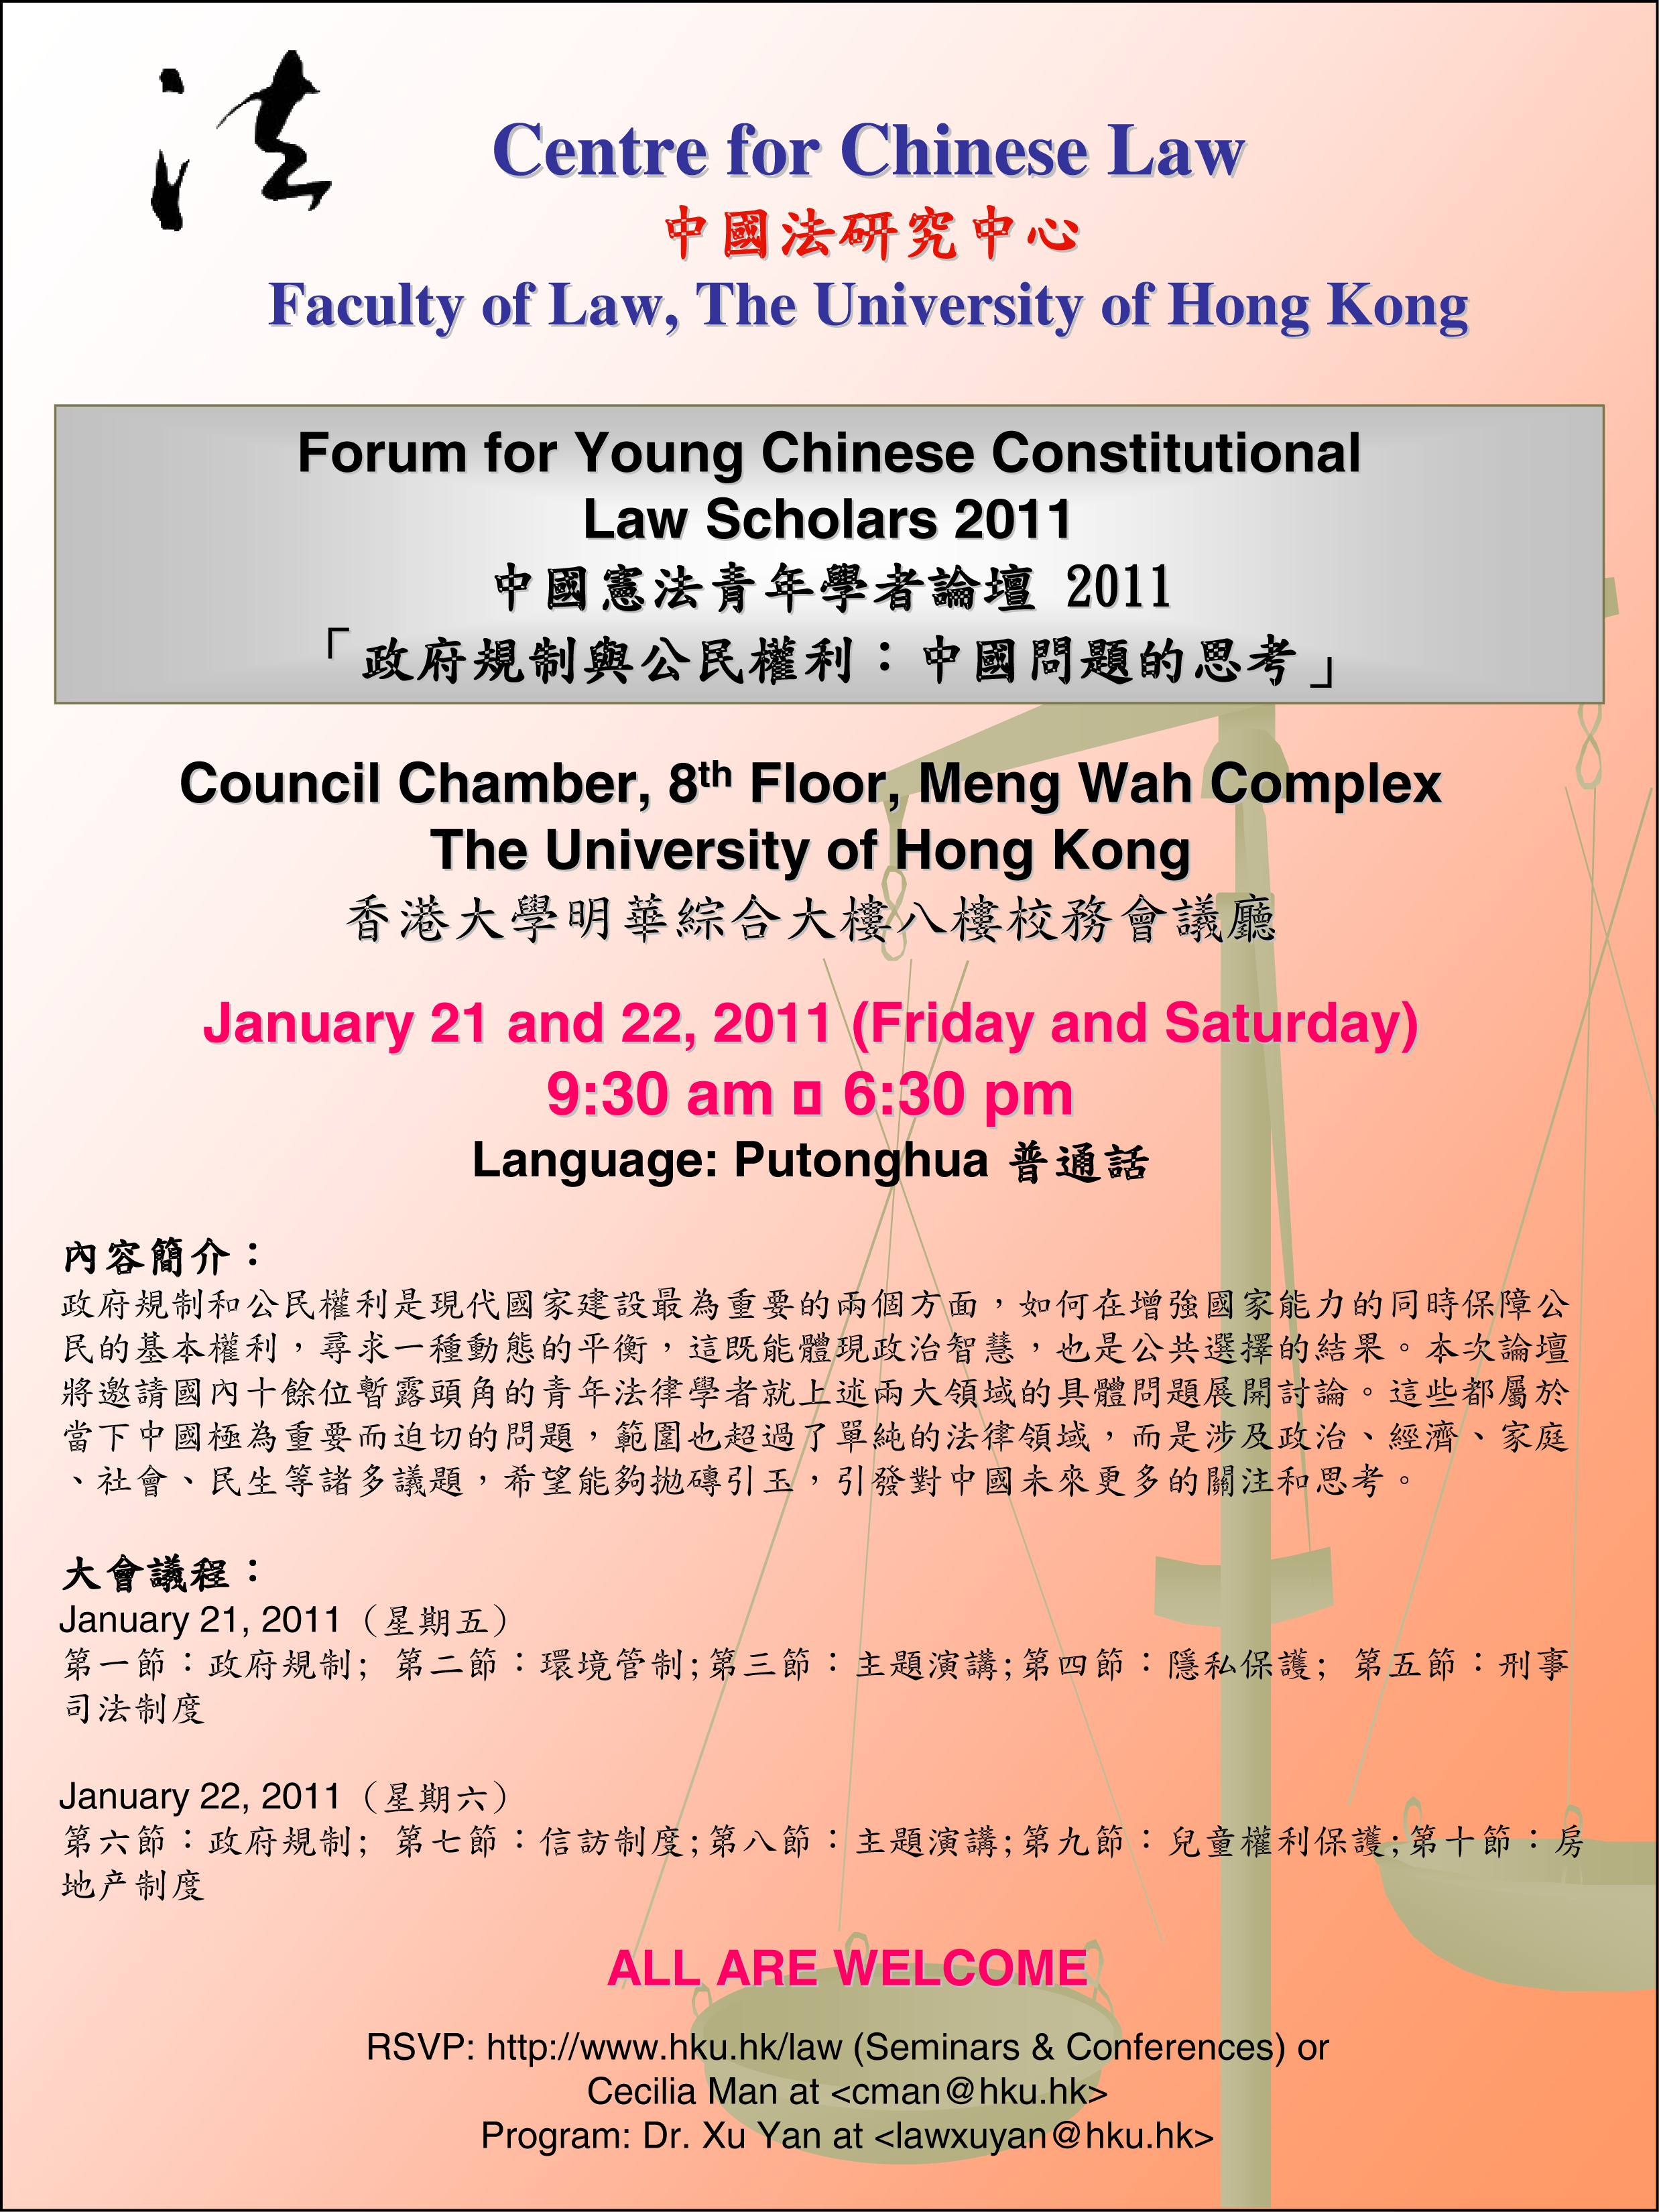 Forum for Young Chinese Constitutional Law Scholars 2011